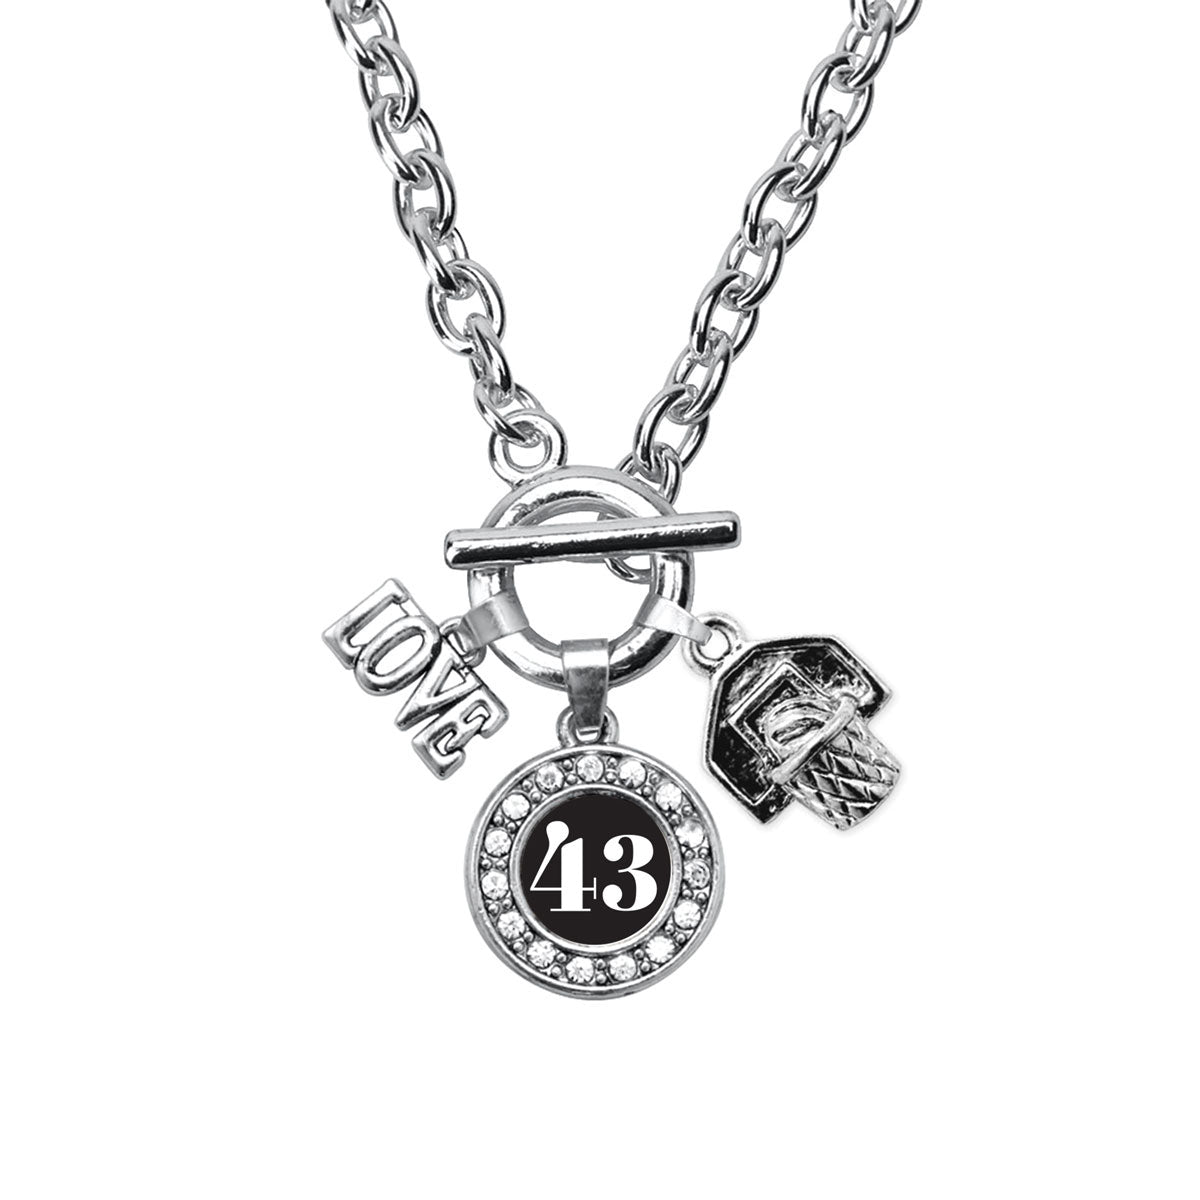 Silver Basketball Hoop - Sports Number 43 Circle Charm Toggle Necklace